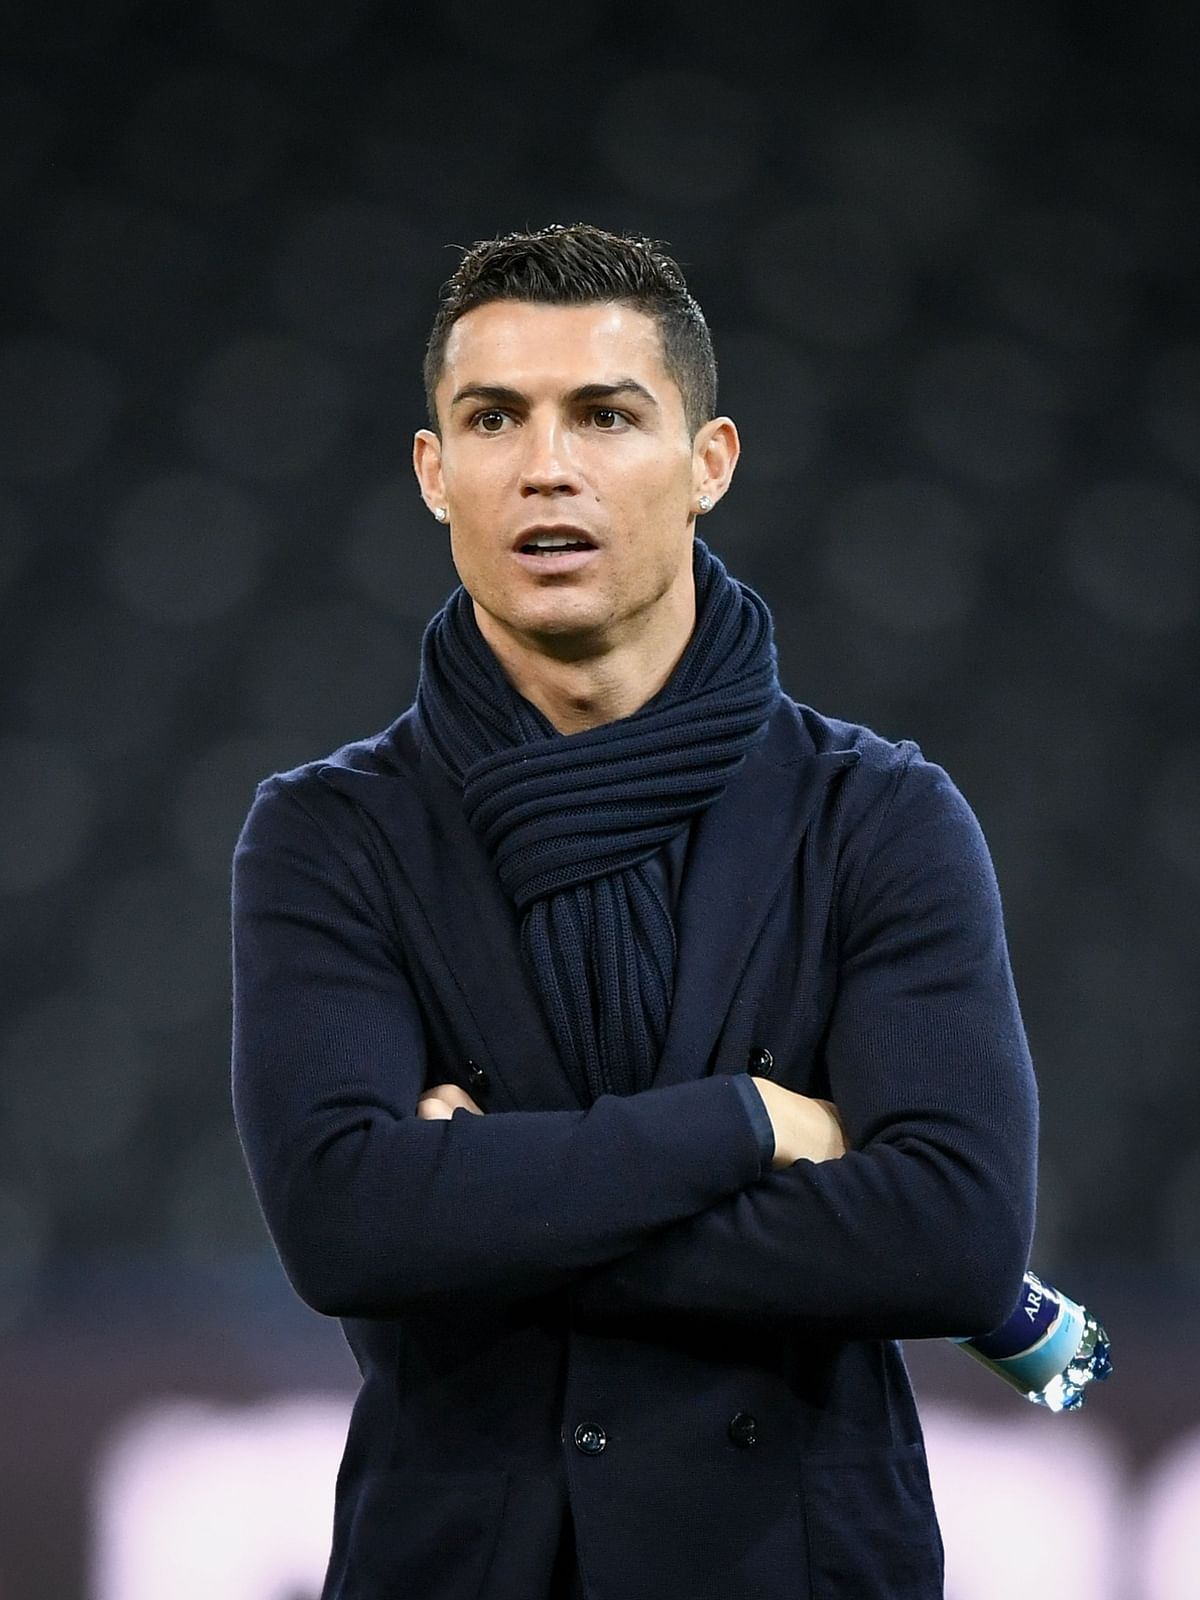 Juventus` Portuguese forward Cristiano Ronaldo looks on during an inspection of the pitch ahead of the Champions League Group H football match between Young Boys and Juventus at the Stade de Suisse stadium on 11 December 2018 in Bern. Photo: AFP